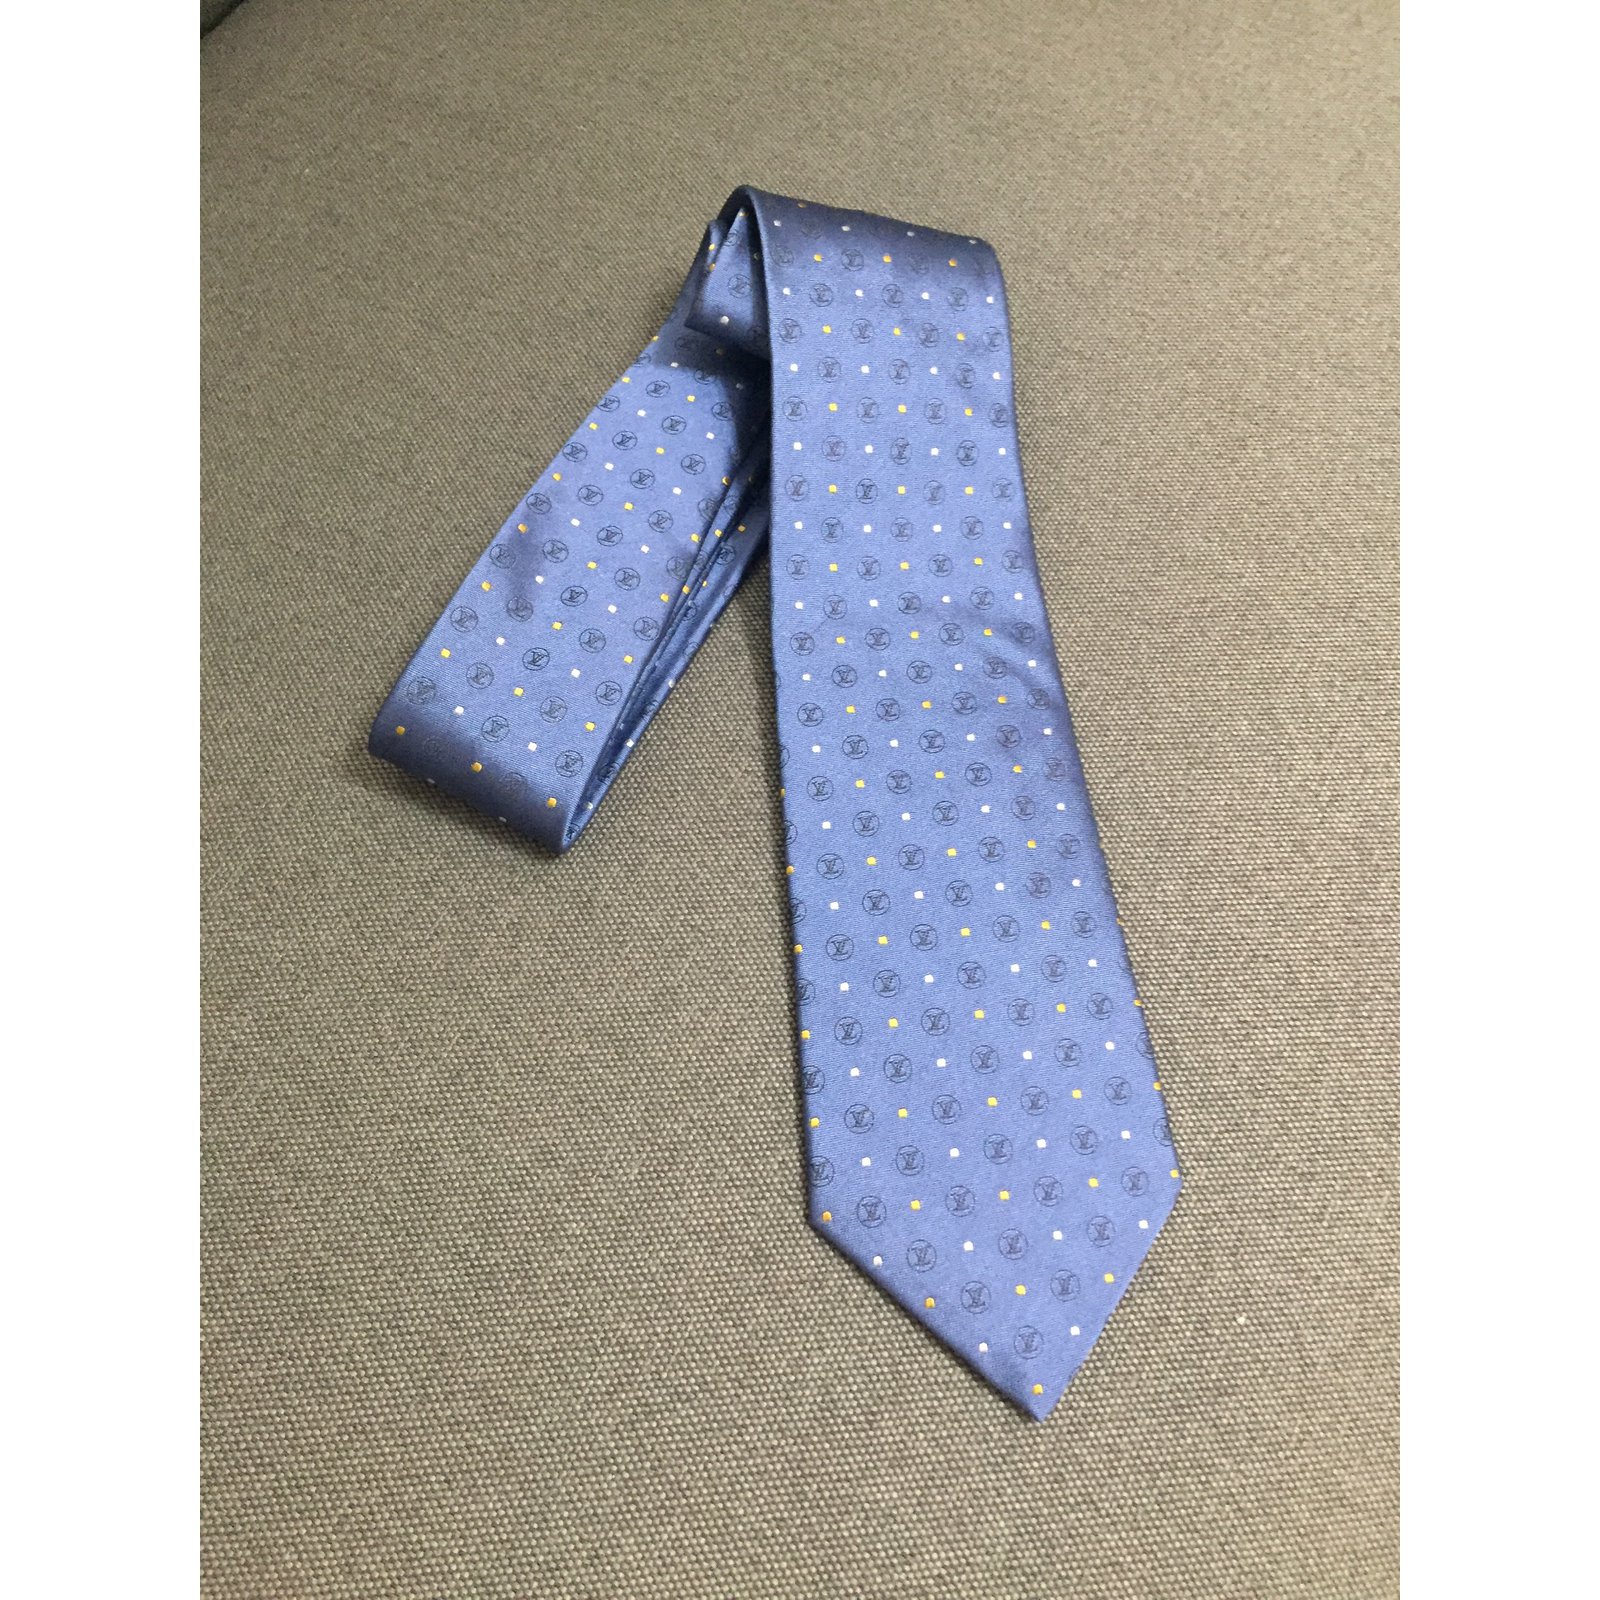 Buy Louis Vuitton tie light blue monogram M73579 beautiful product silk  100% used MR0139 LOUIS VUITTON business apparel from Japan - Buy authentic  Plus exclusive items from Japan